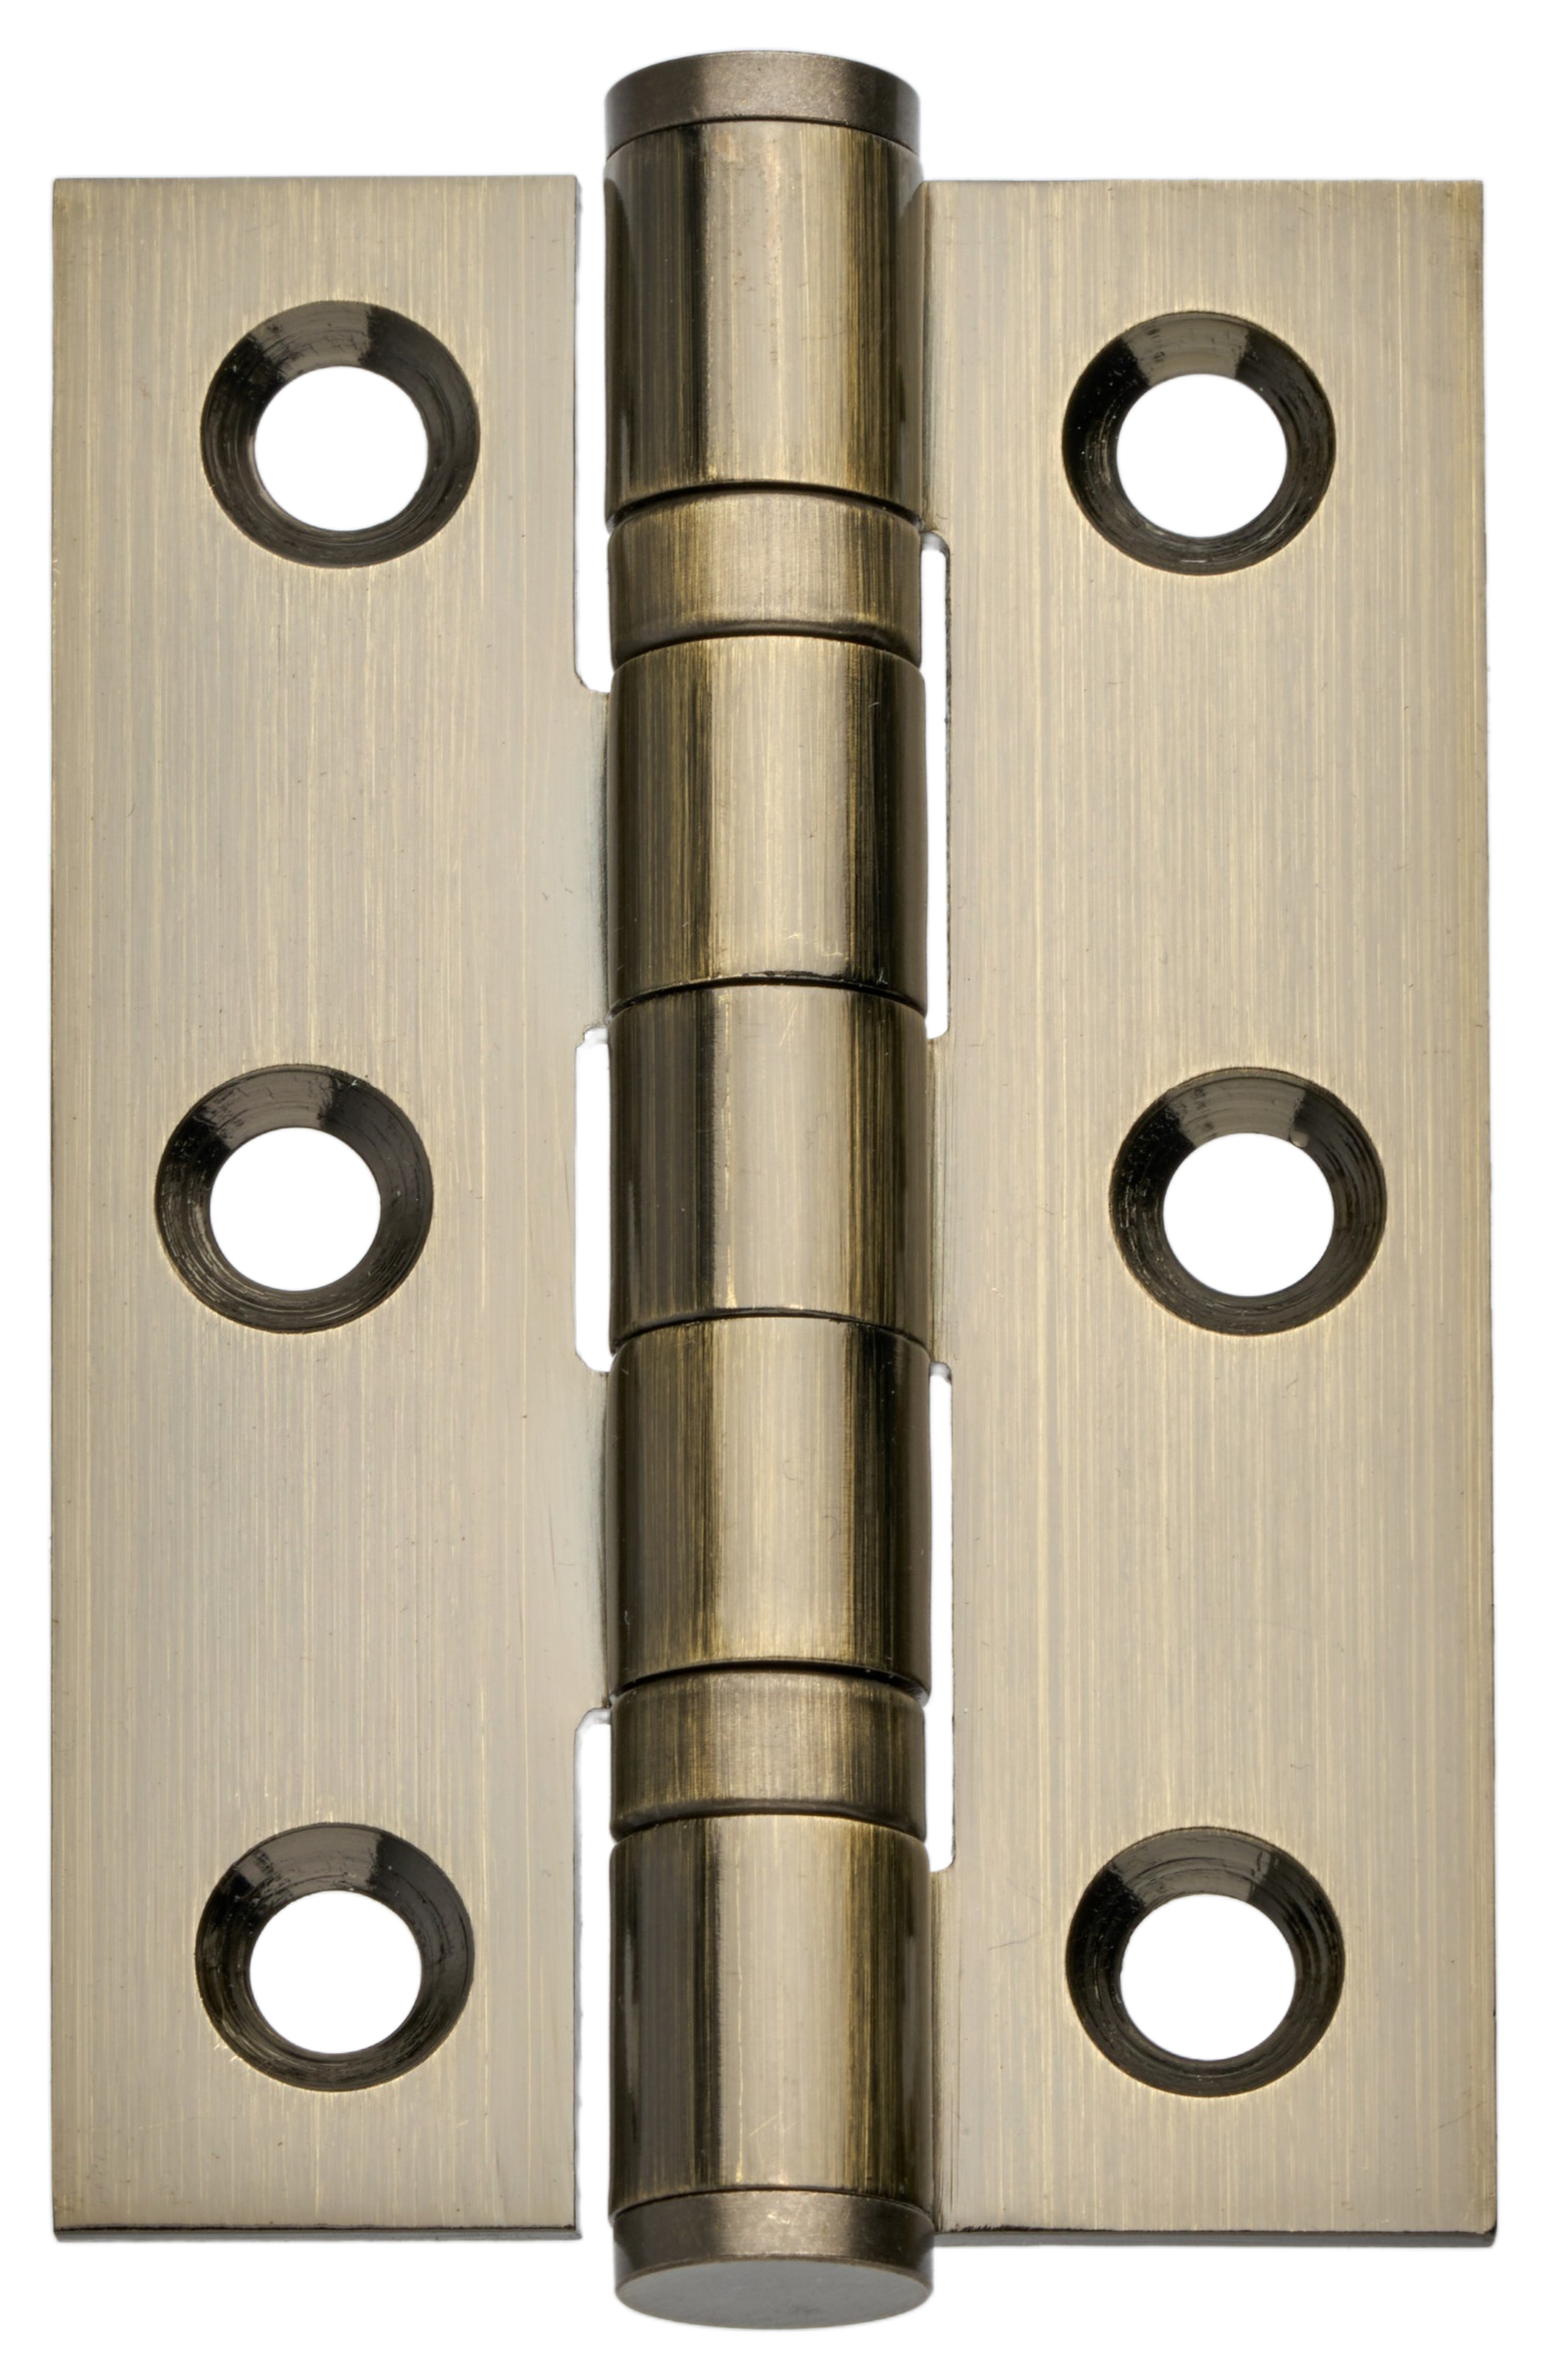 Ball Bearing Hinge Stainless Steel Antique Brass 76mm - Pack of 3